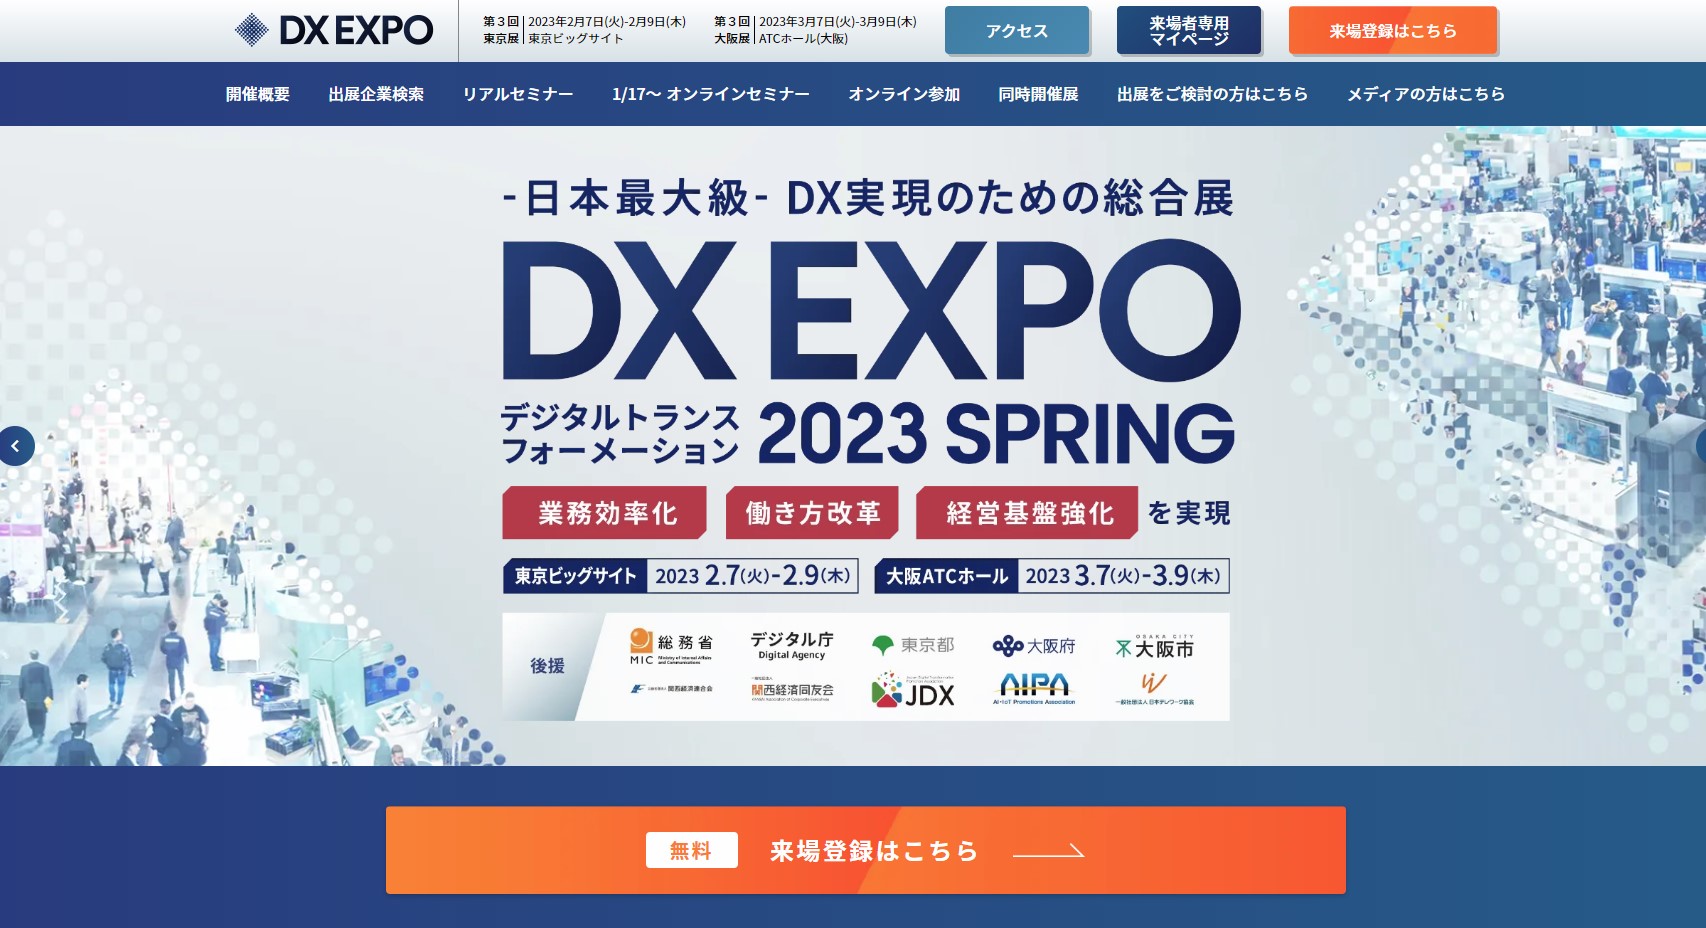 DX EXPO2023 Spring